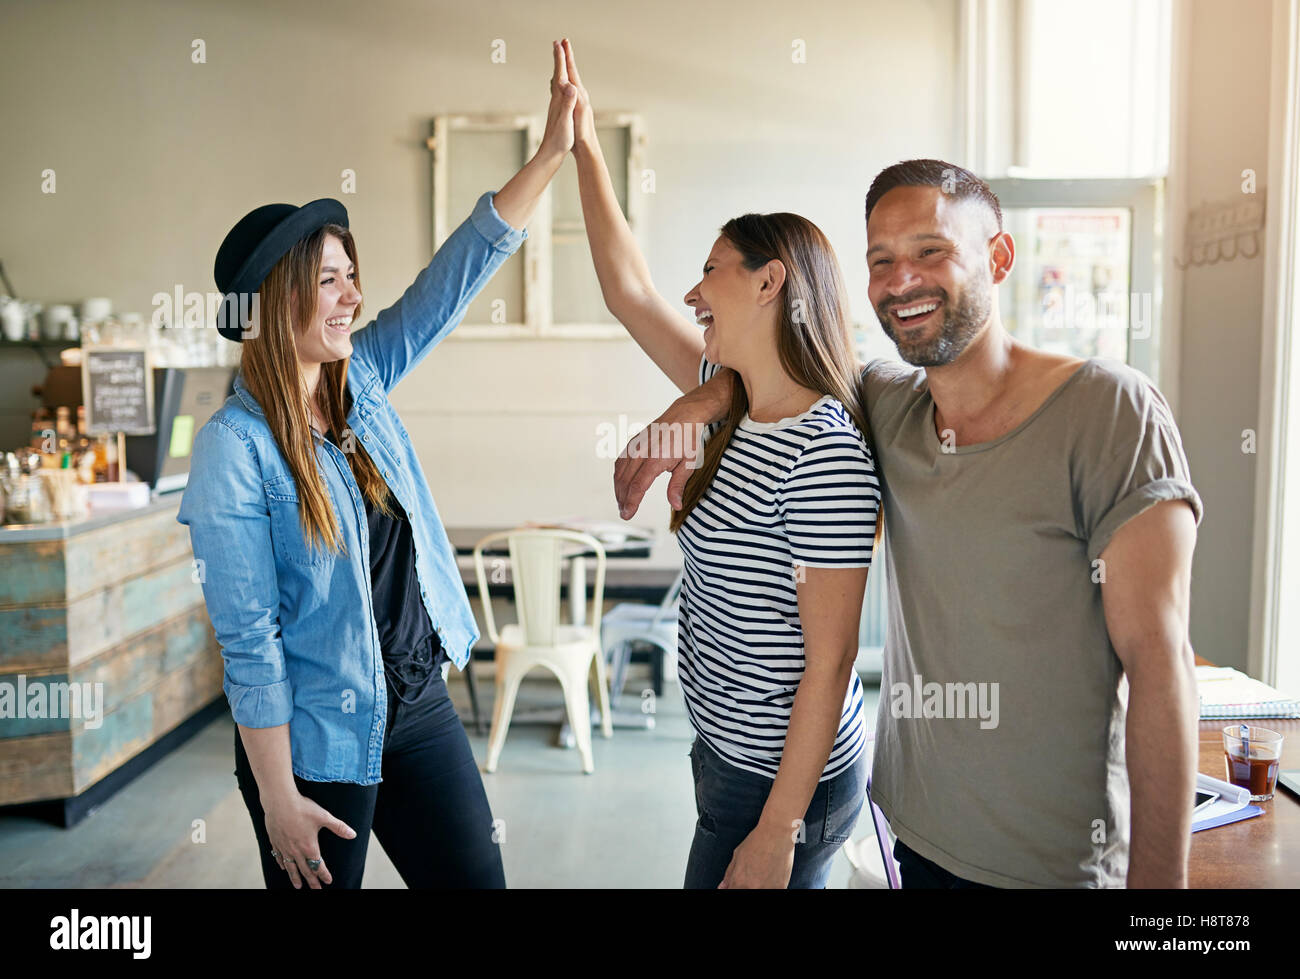 Two women putting up high fives with bearded handsome male friend standing next to them in coffee house Stock Photo